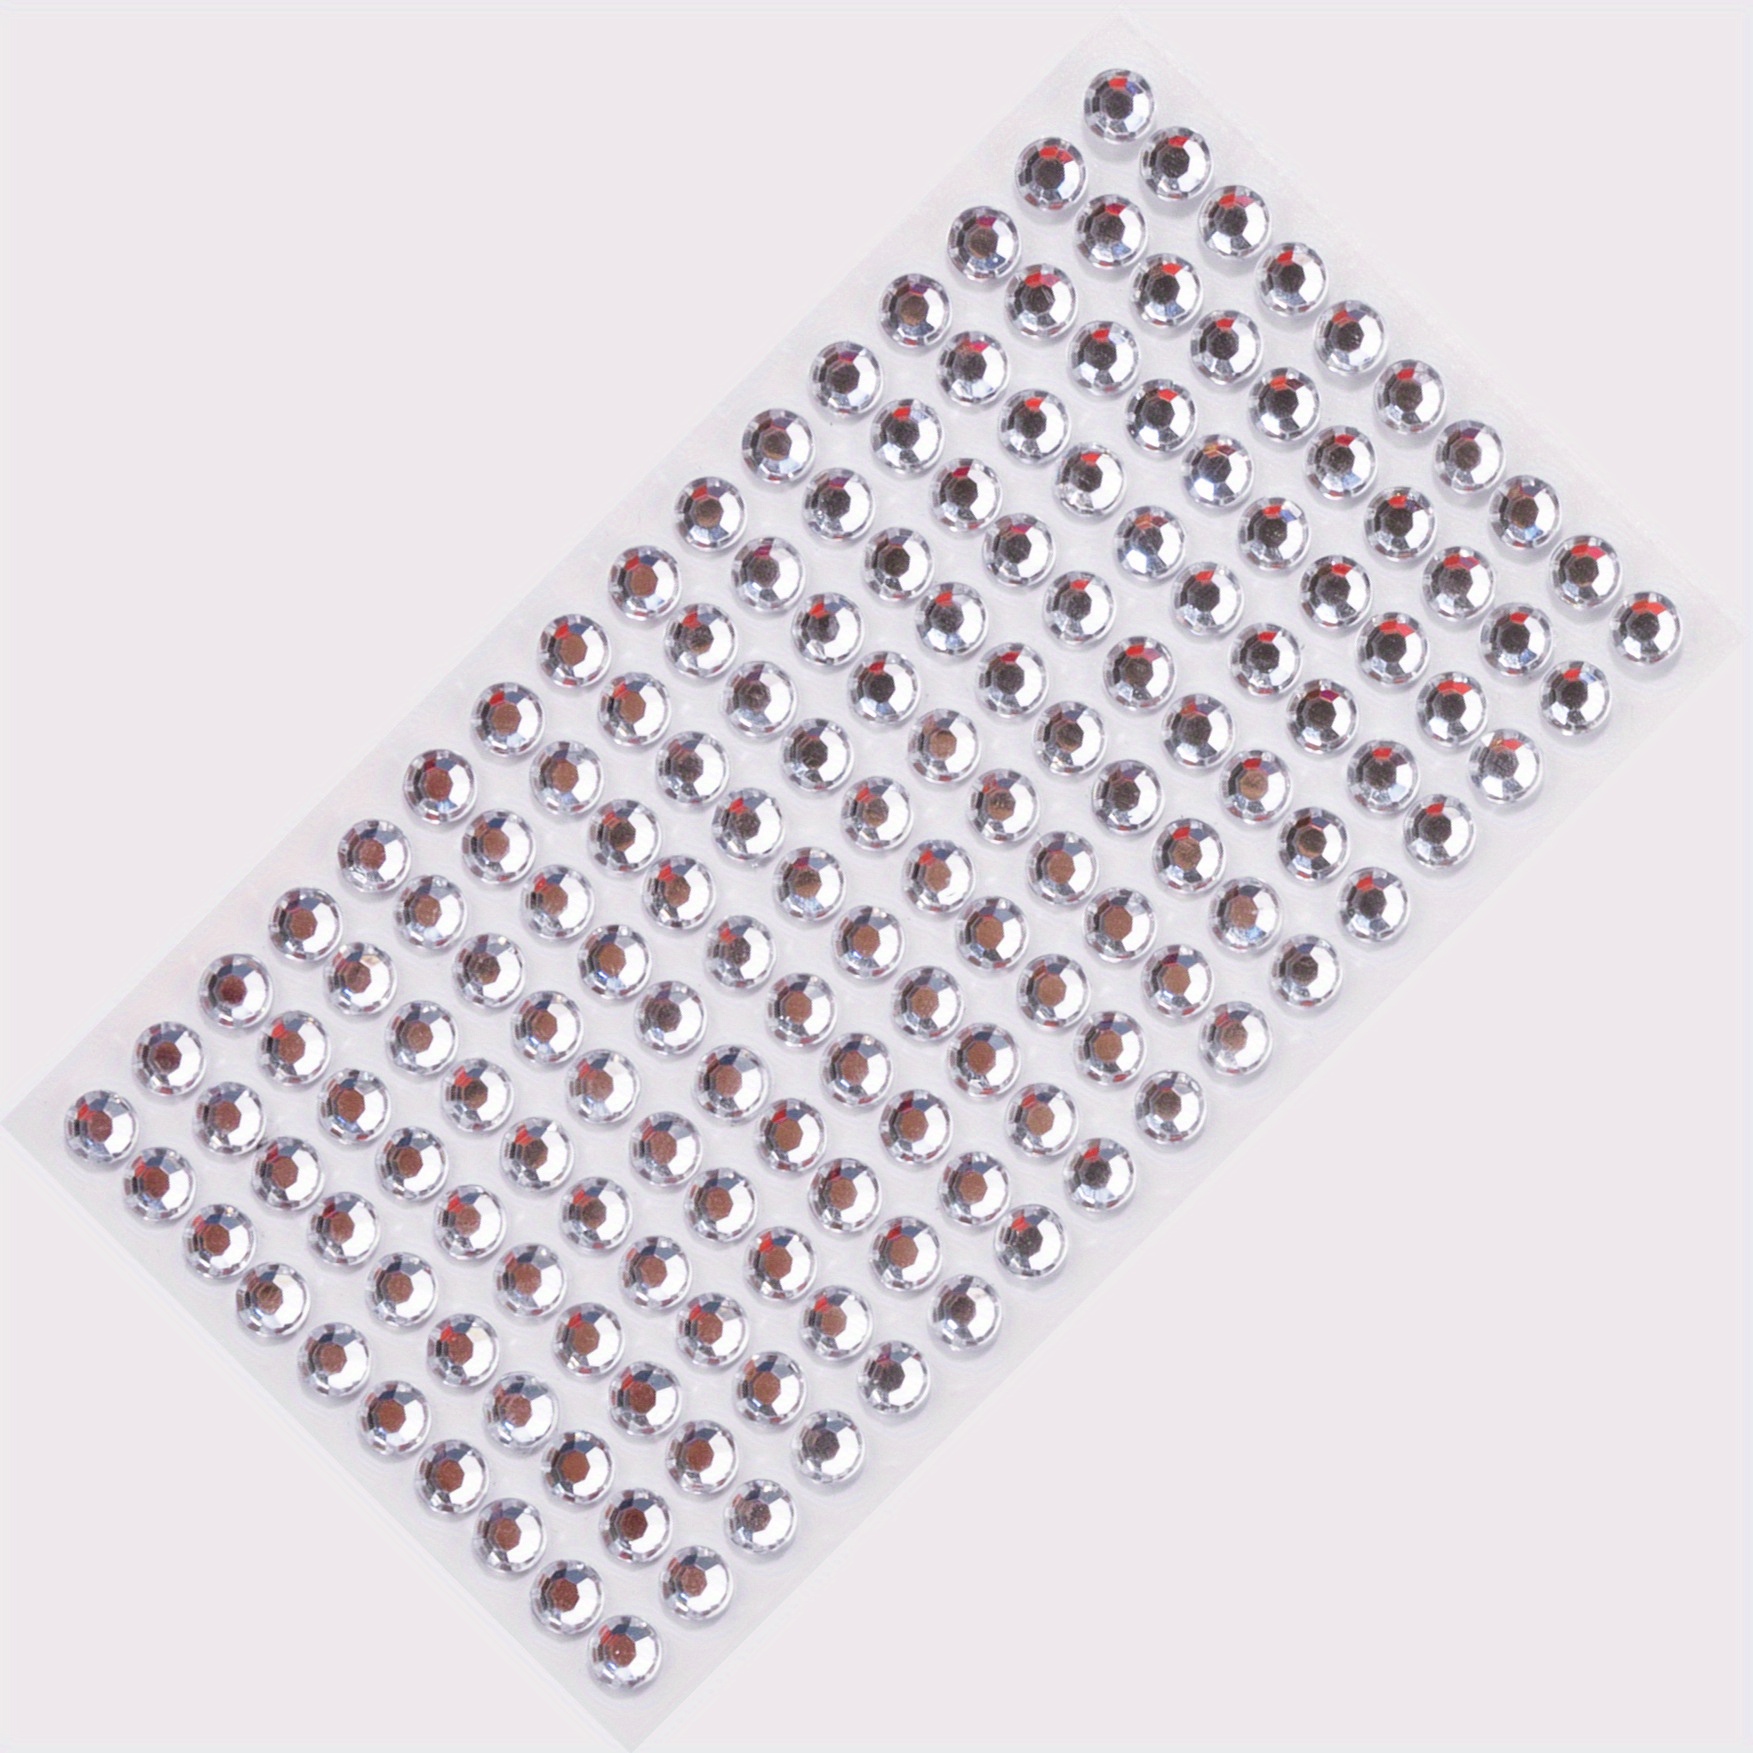 6MM/0.24IN Rhinestone Stickers for DIY Crafts Nails Makeup & More!-JournalTale